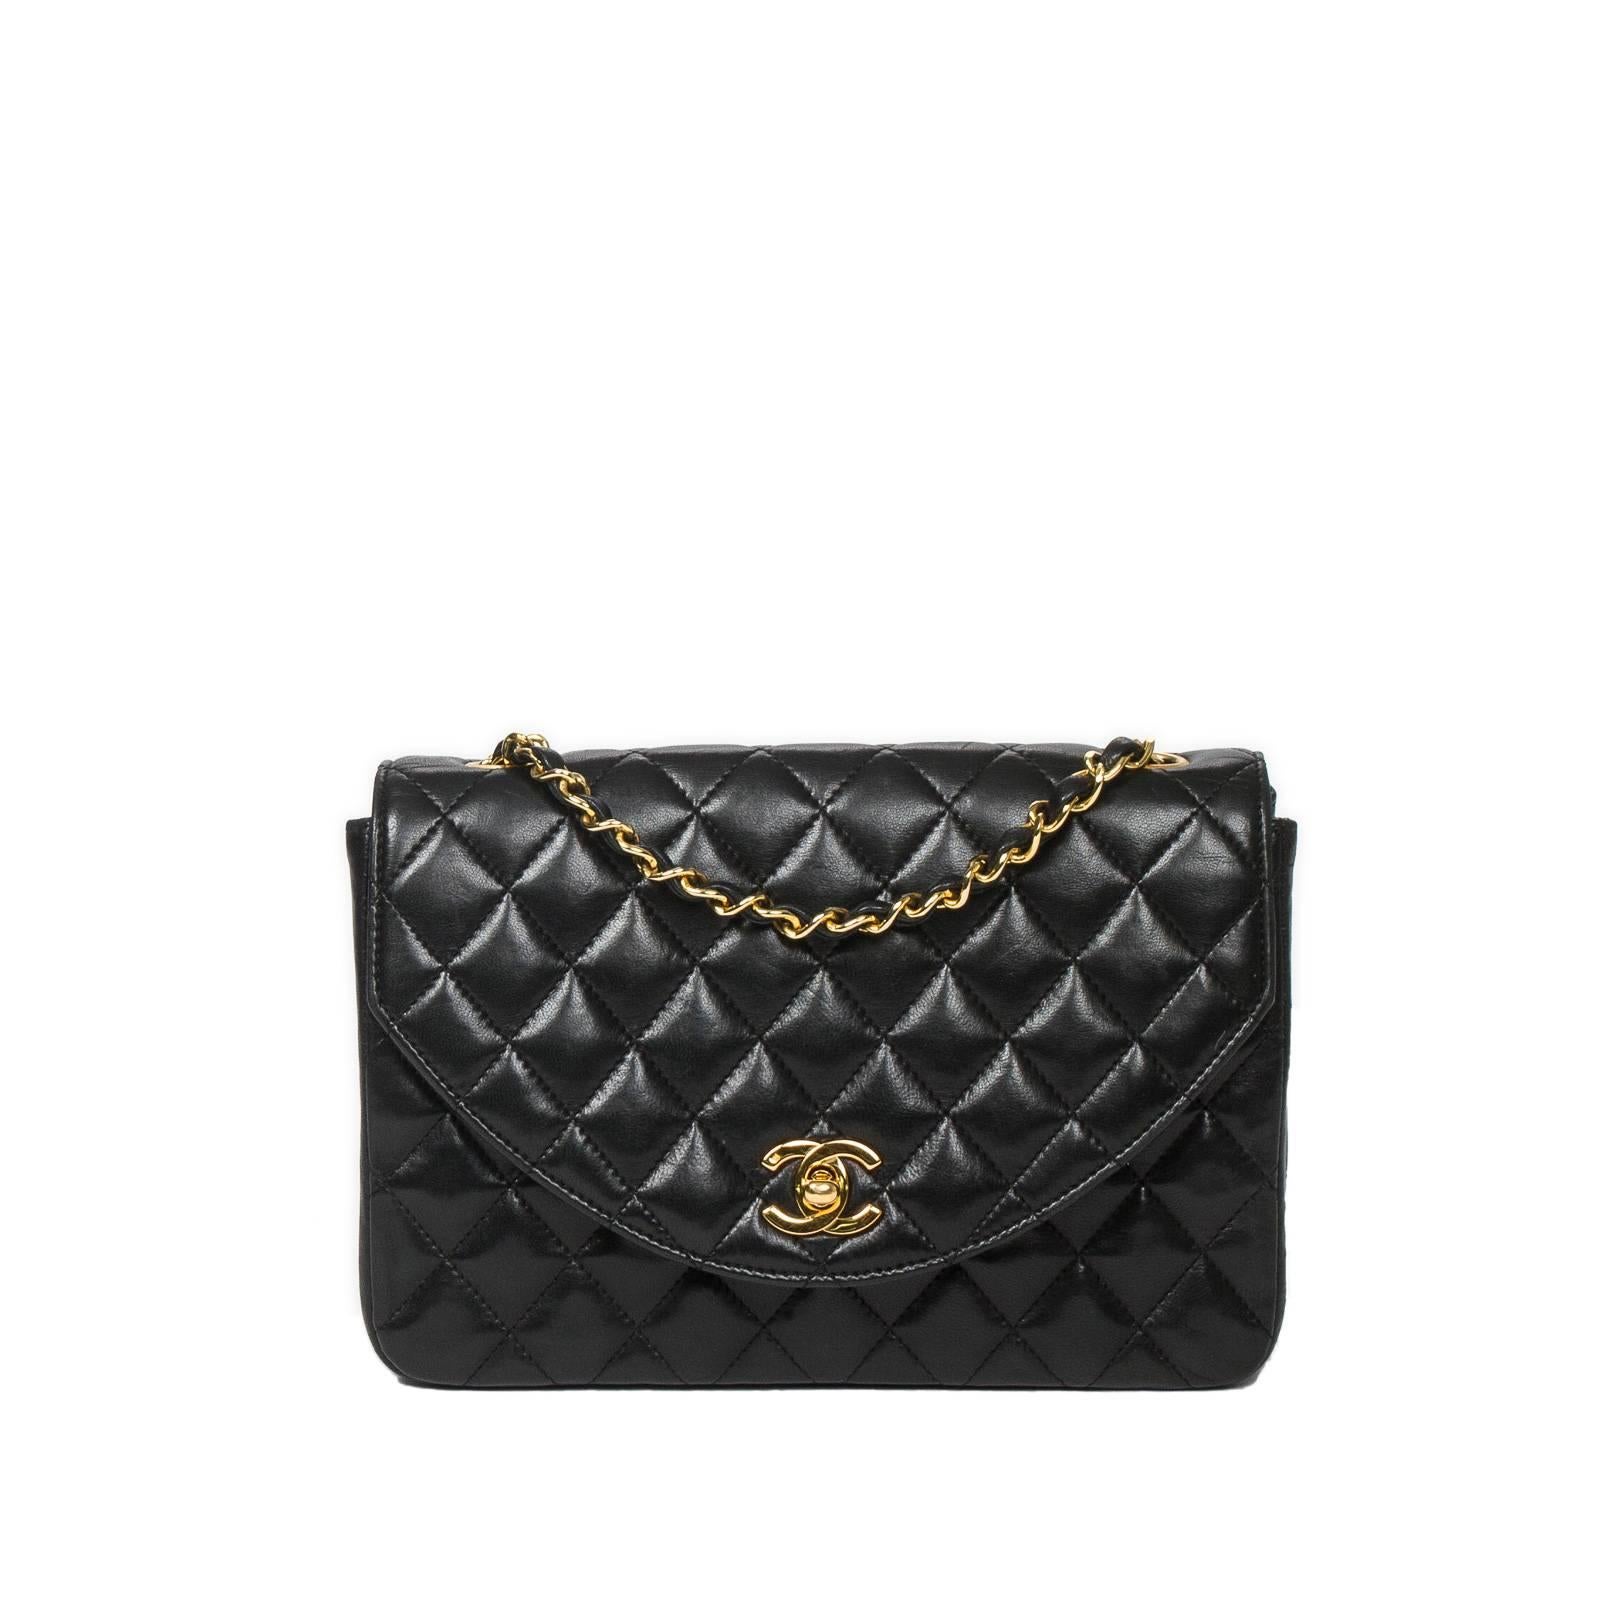 Chanel Vintage Single Flap 23cm Black Quilted Leather